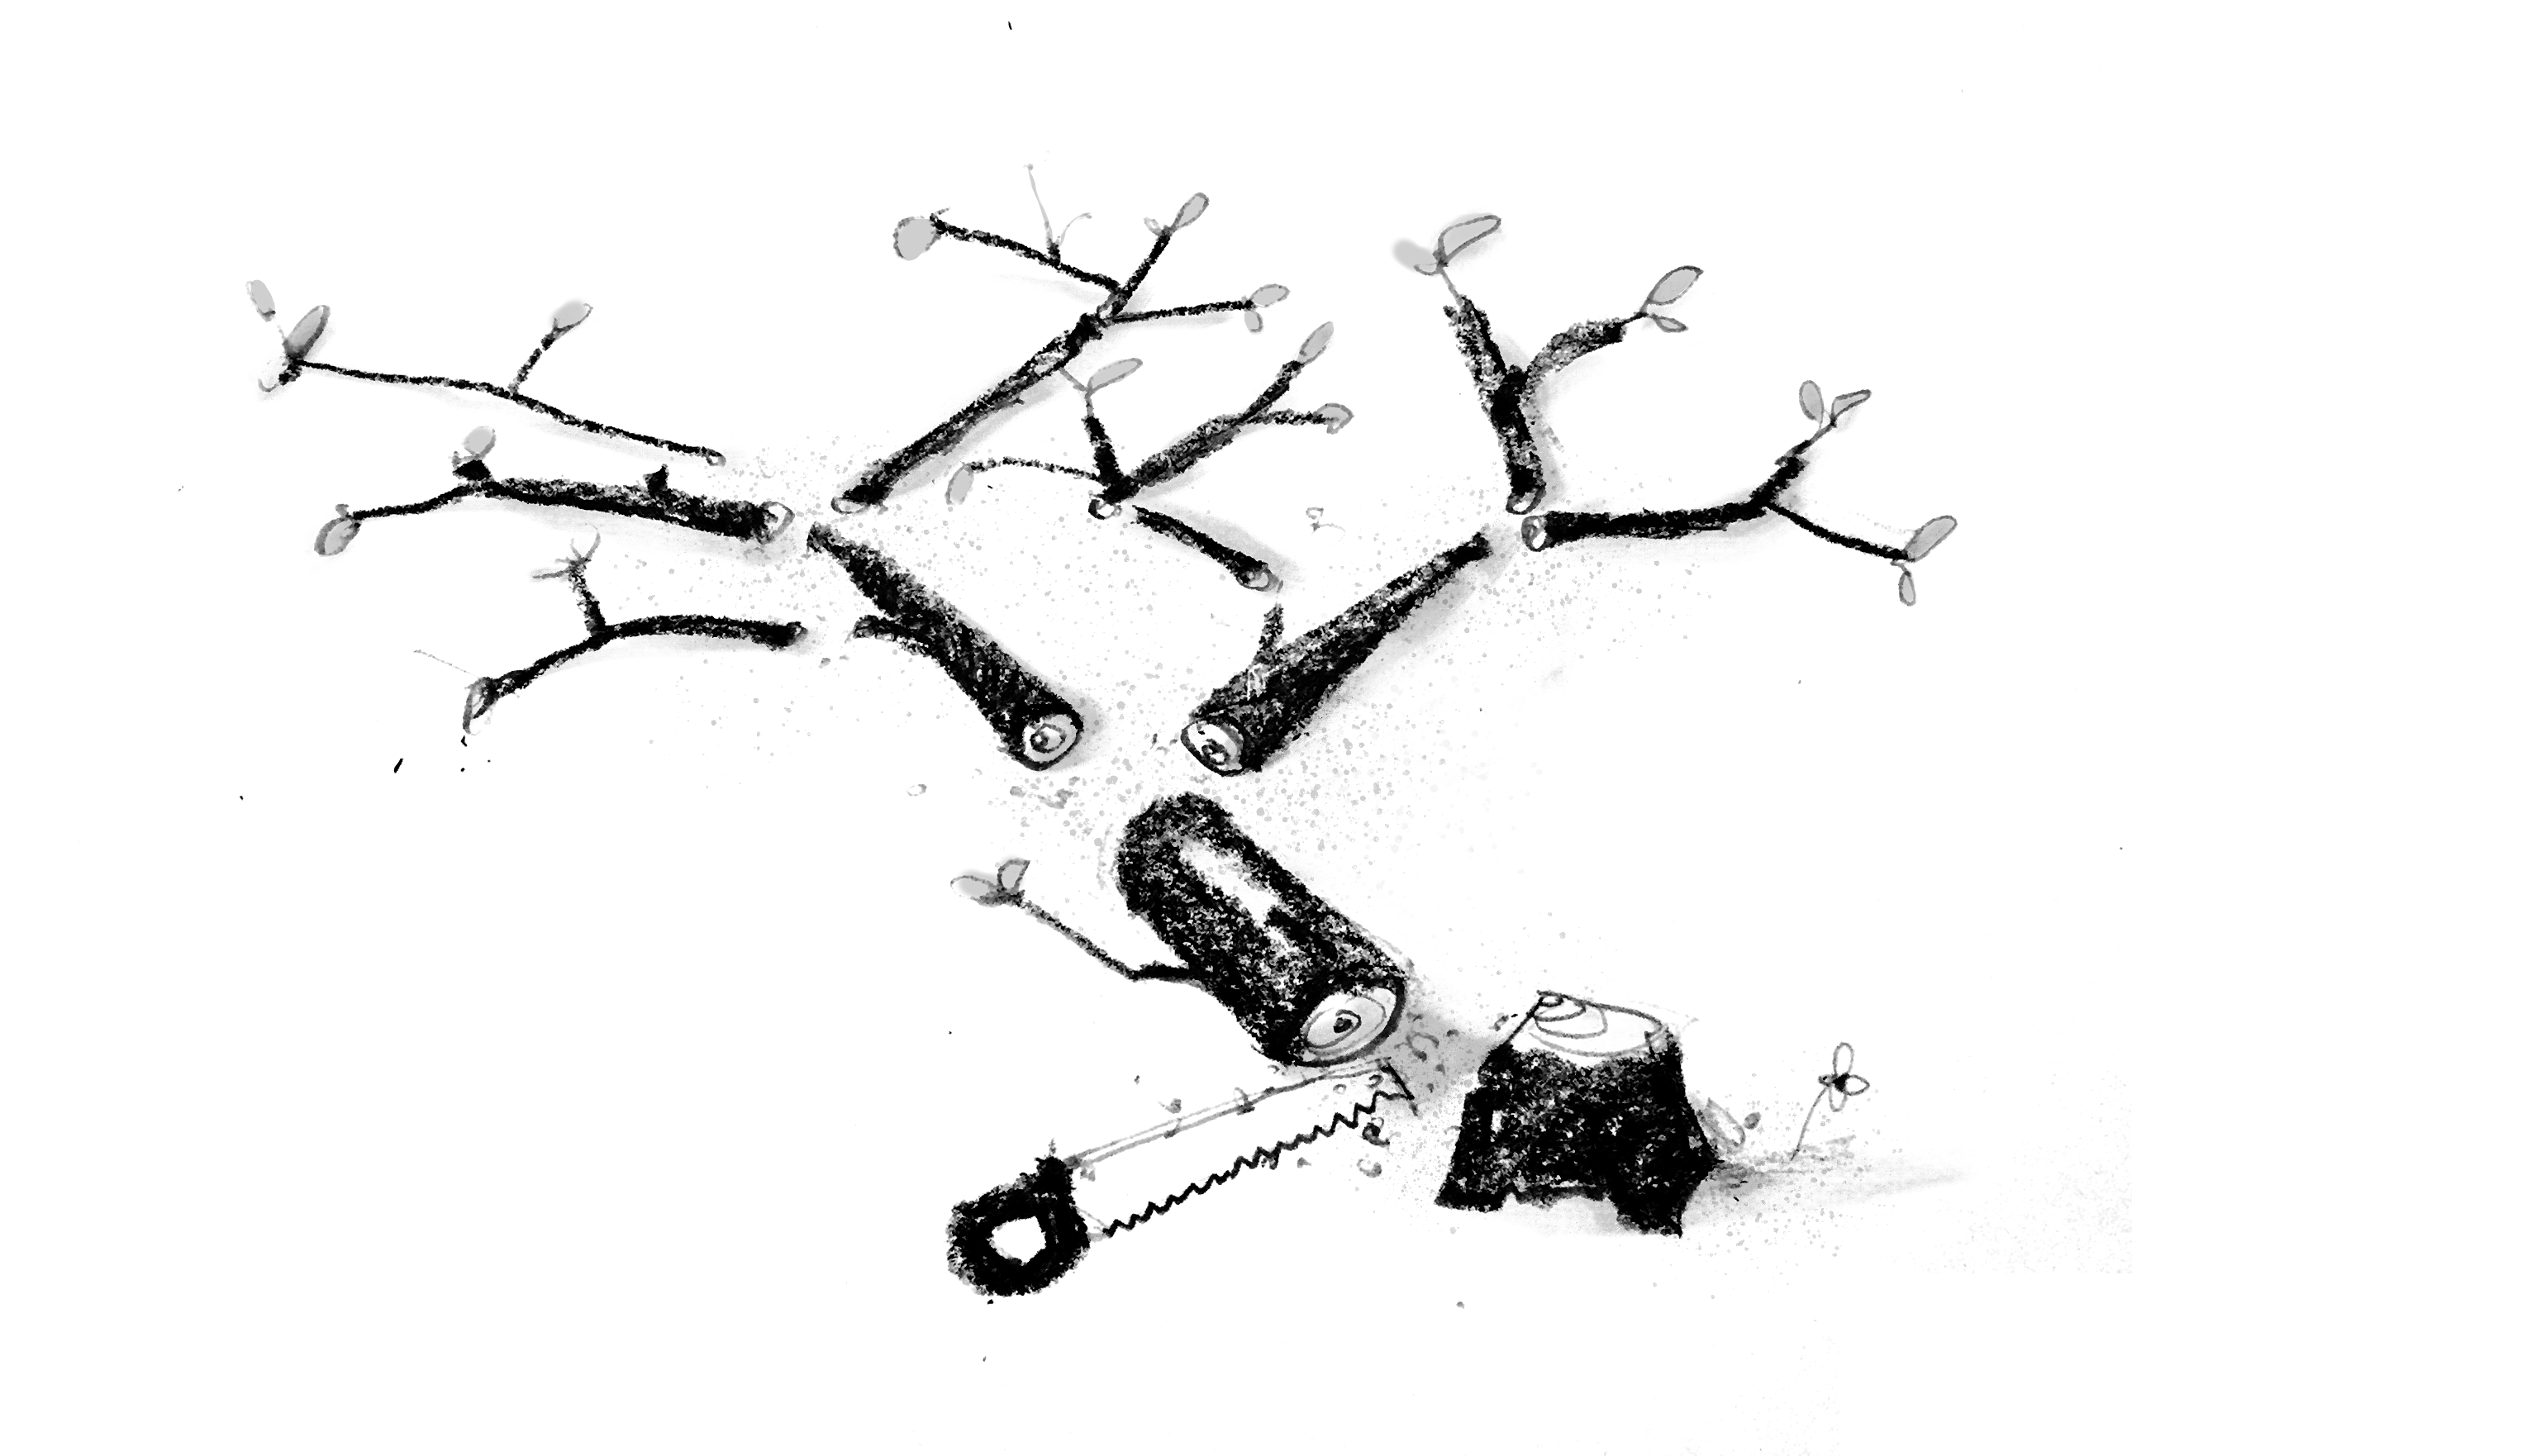 An illustration of a tree sawed at the trunk and in small pieces, with a handsaw nearby.